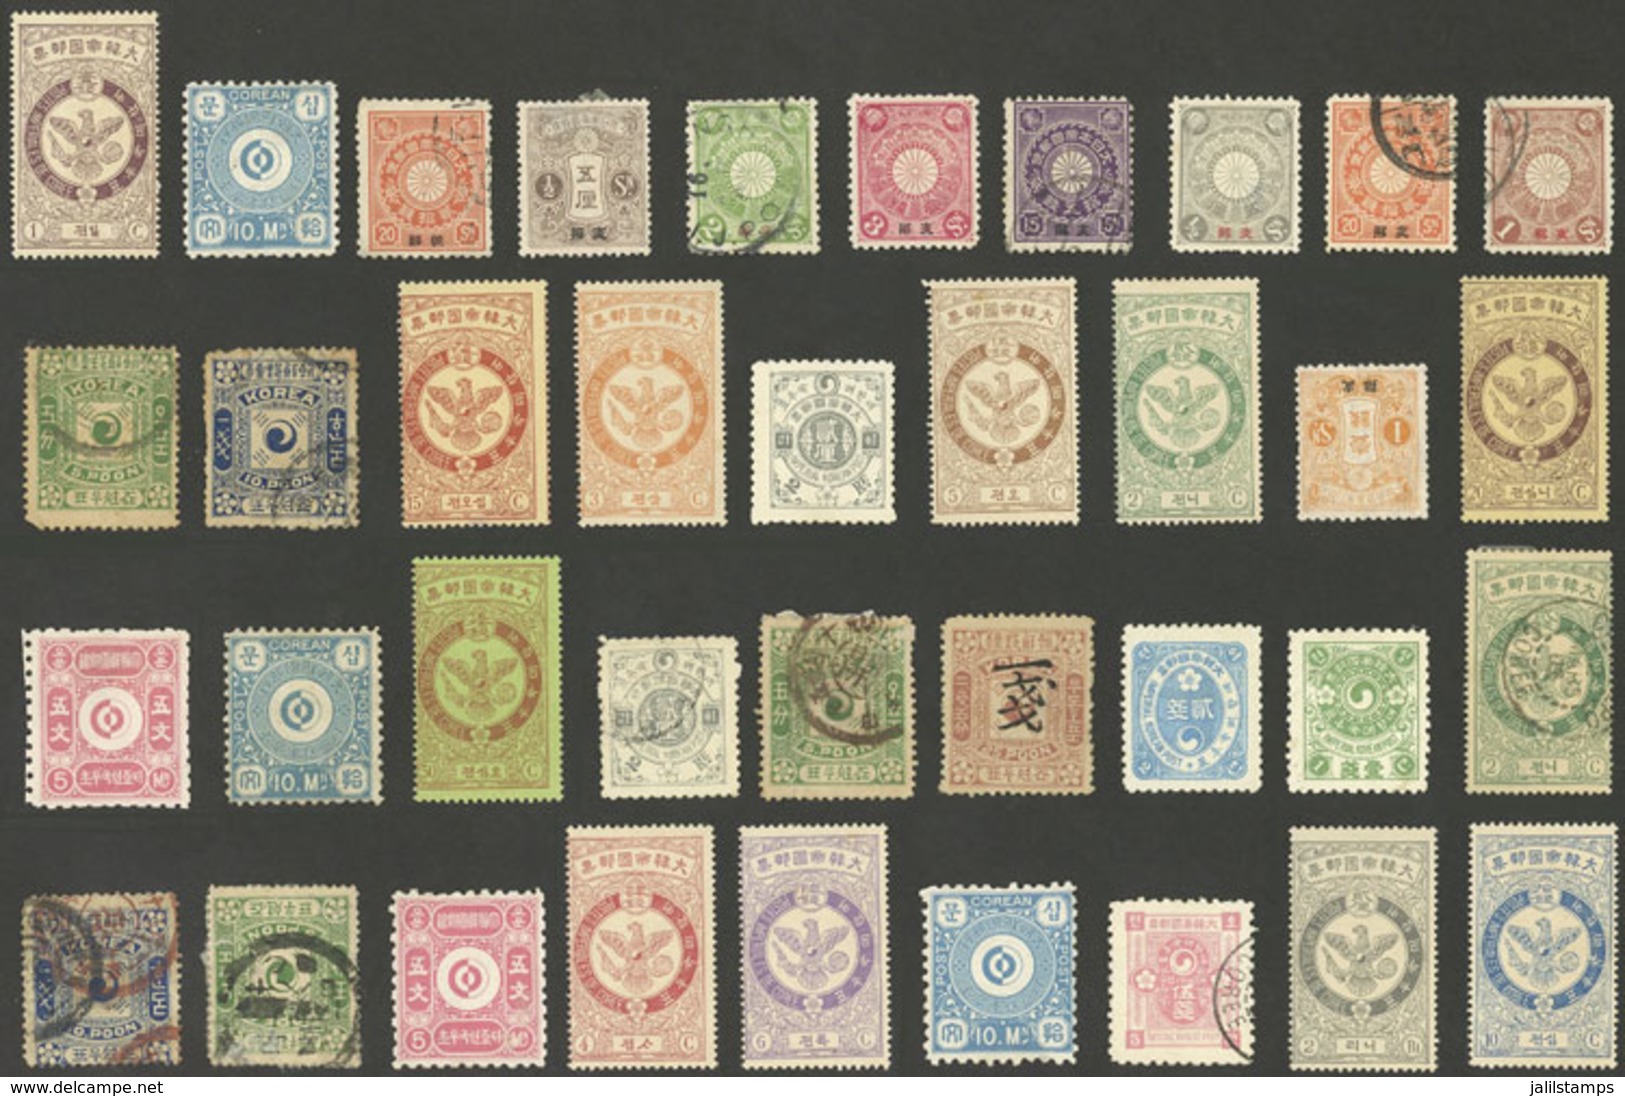 KOREA: Interesting Lot Of Old Stamps, Used Or Mint Without Gum, Most Of Fine Quality! - Korea (...-1945)